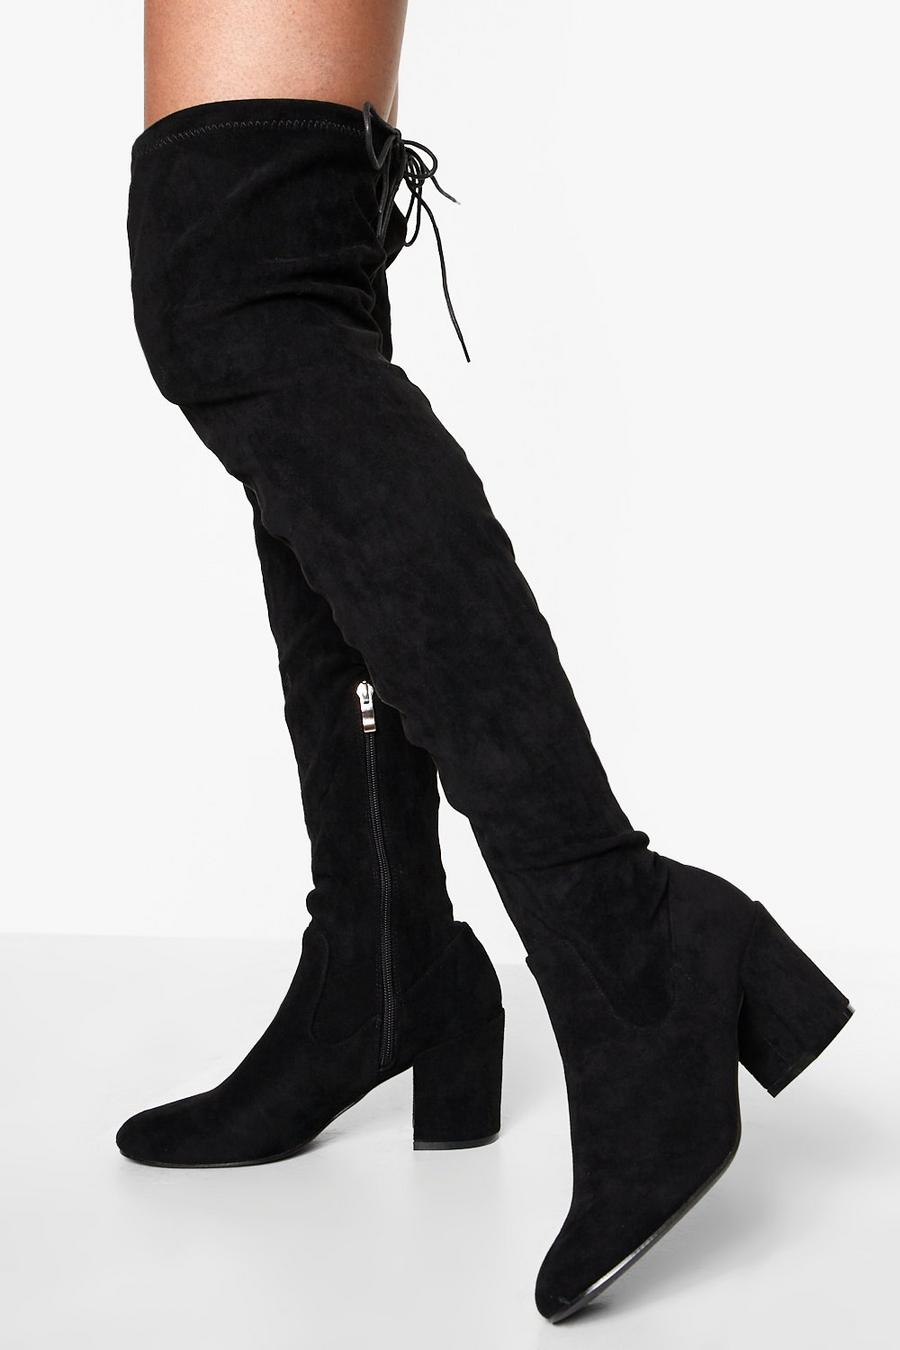 Black Block Heel Thigh High Over The Knee Boots image number 1